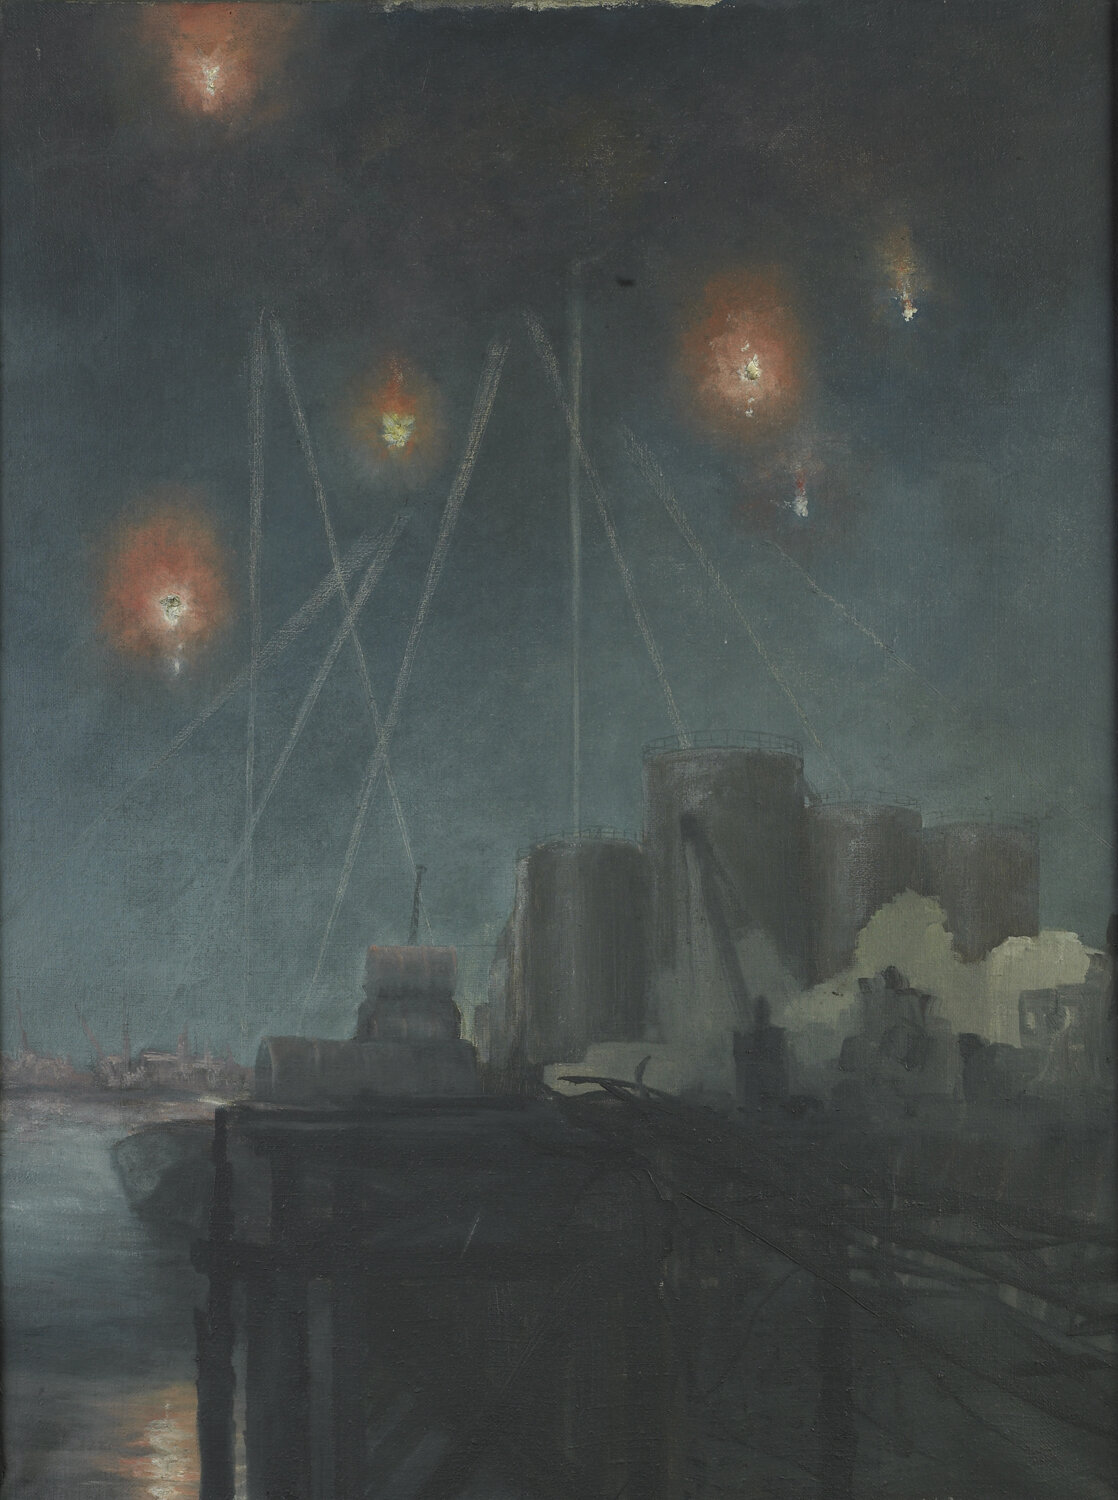 Night Raid Over London by 'fireman artist' Wilfred Stanley Haines, c 1941